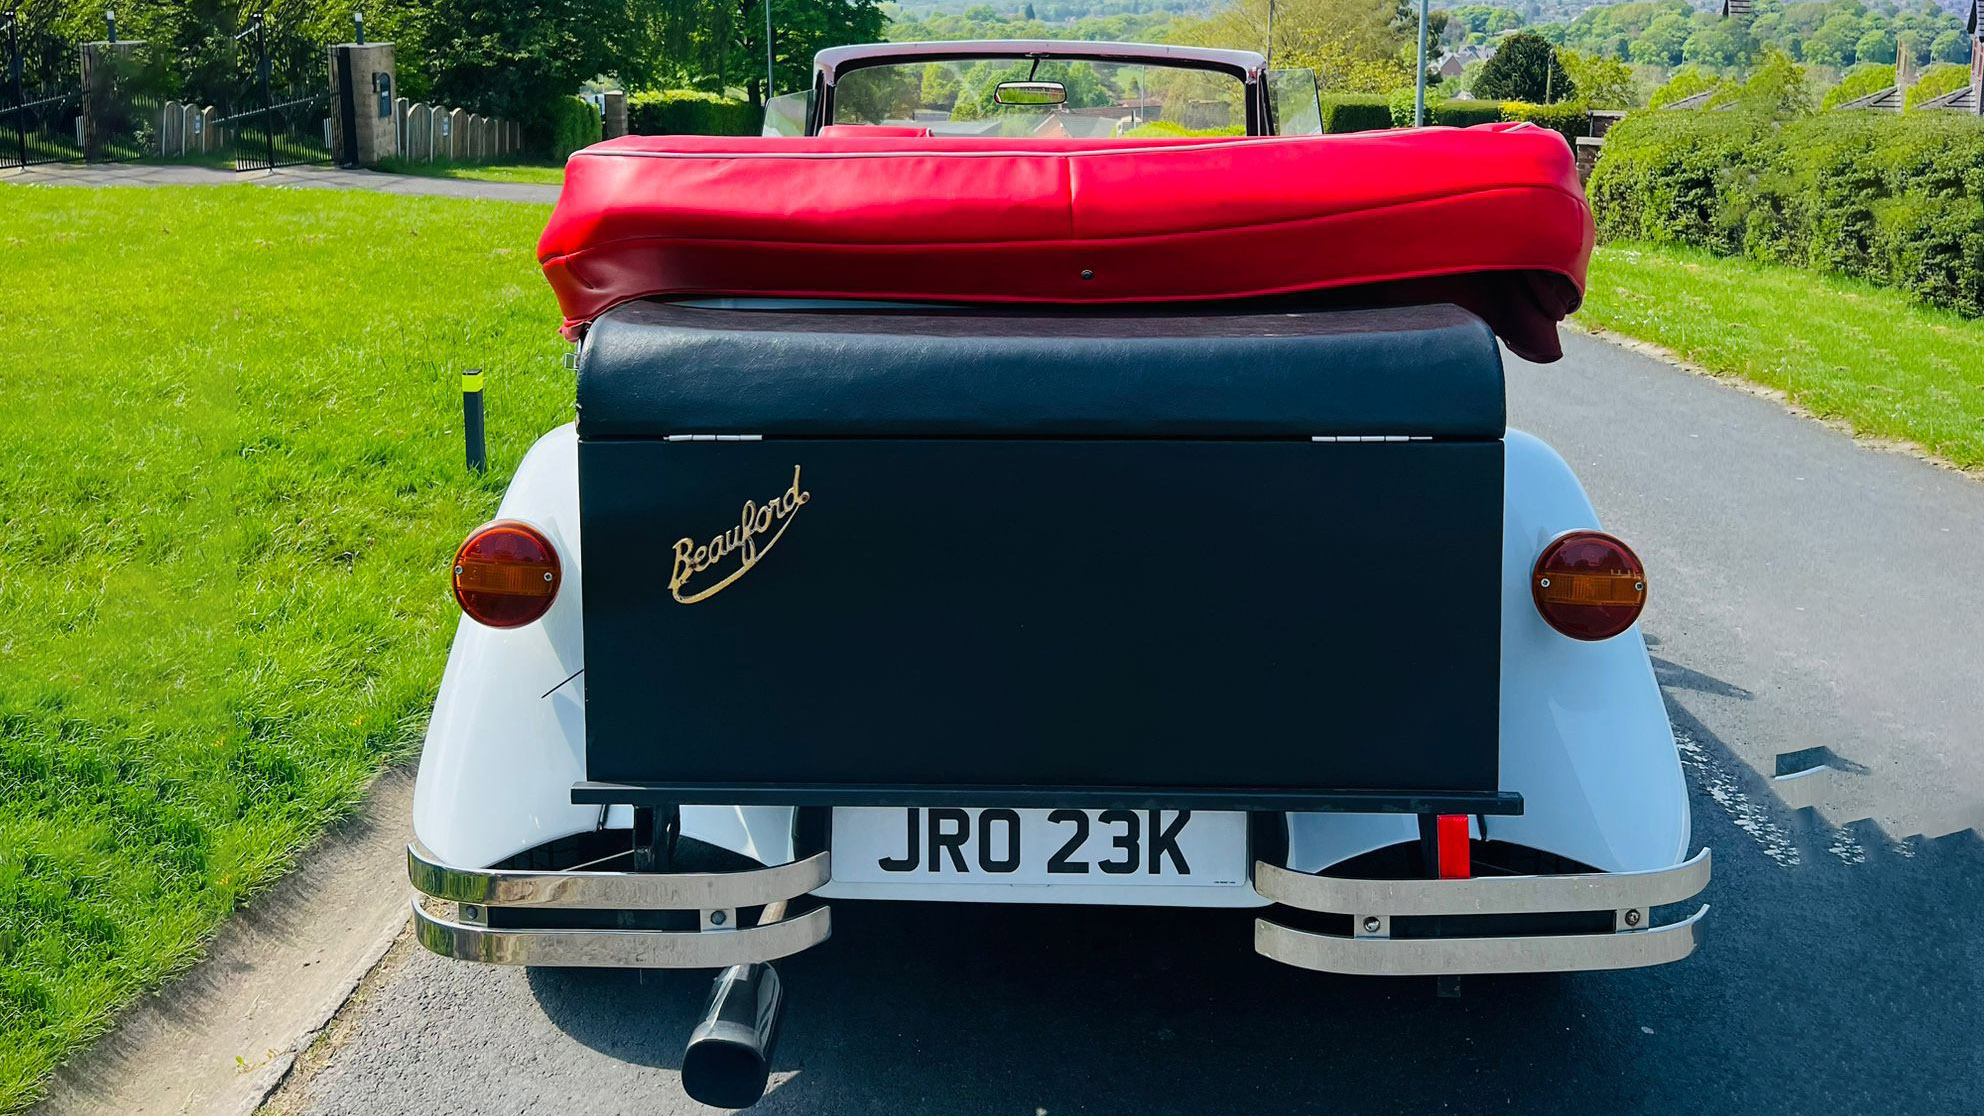 Full rear view of the White Beauford and its black picnic trunk